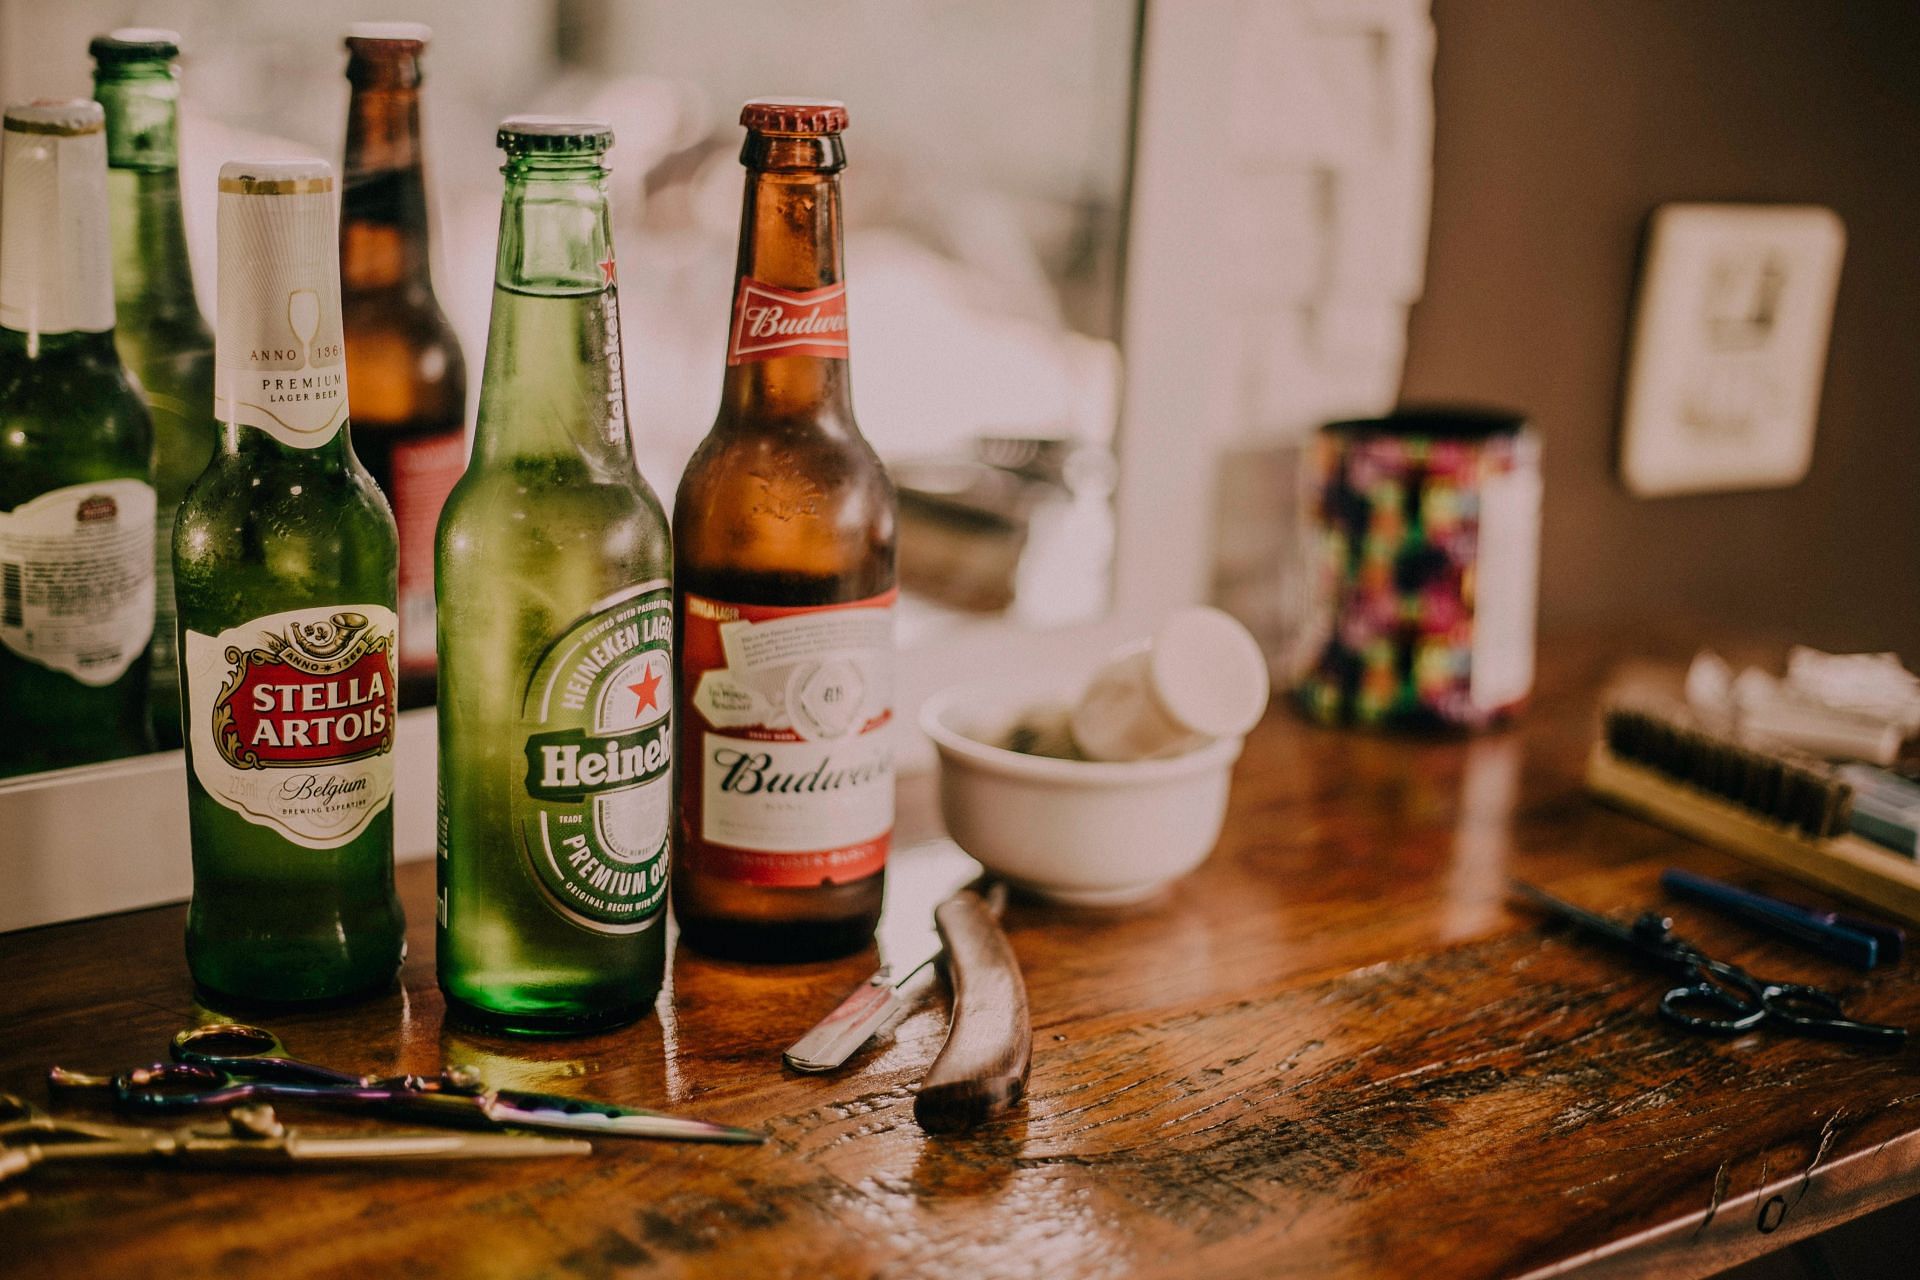 Short and long-term effects of alcohol on body (image sourced via Pexels / Photo by Edward)